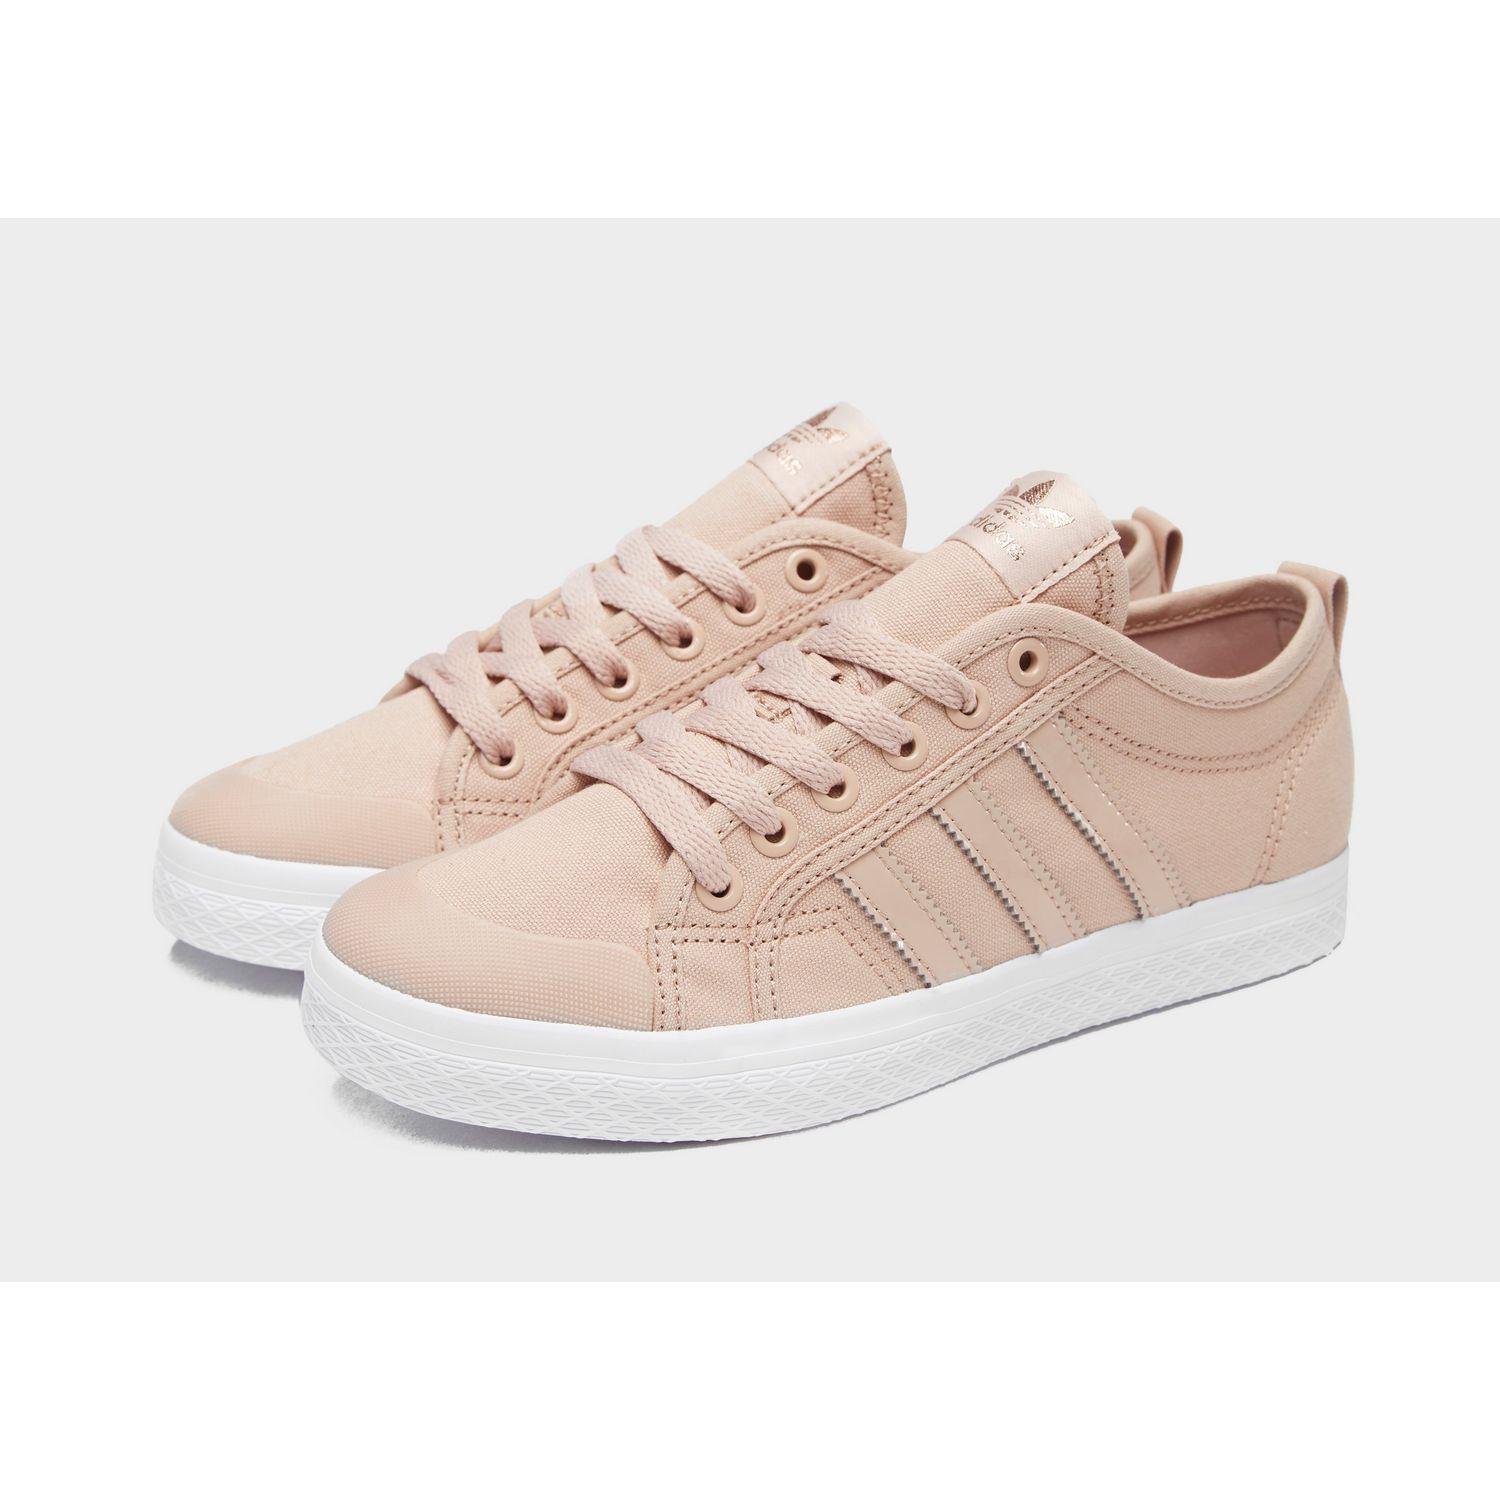 adidas honey low shoes